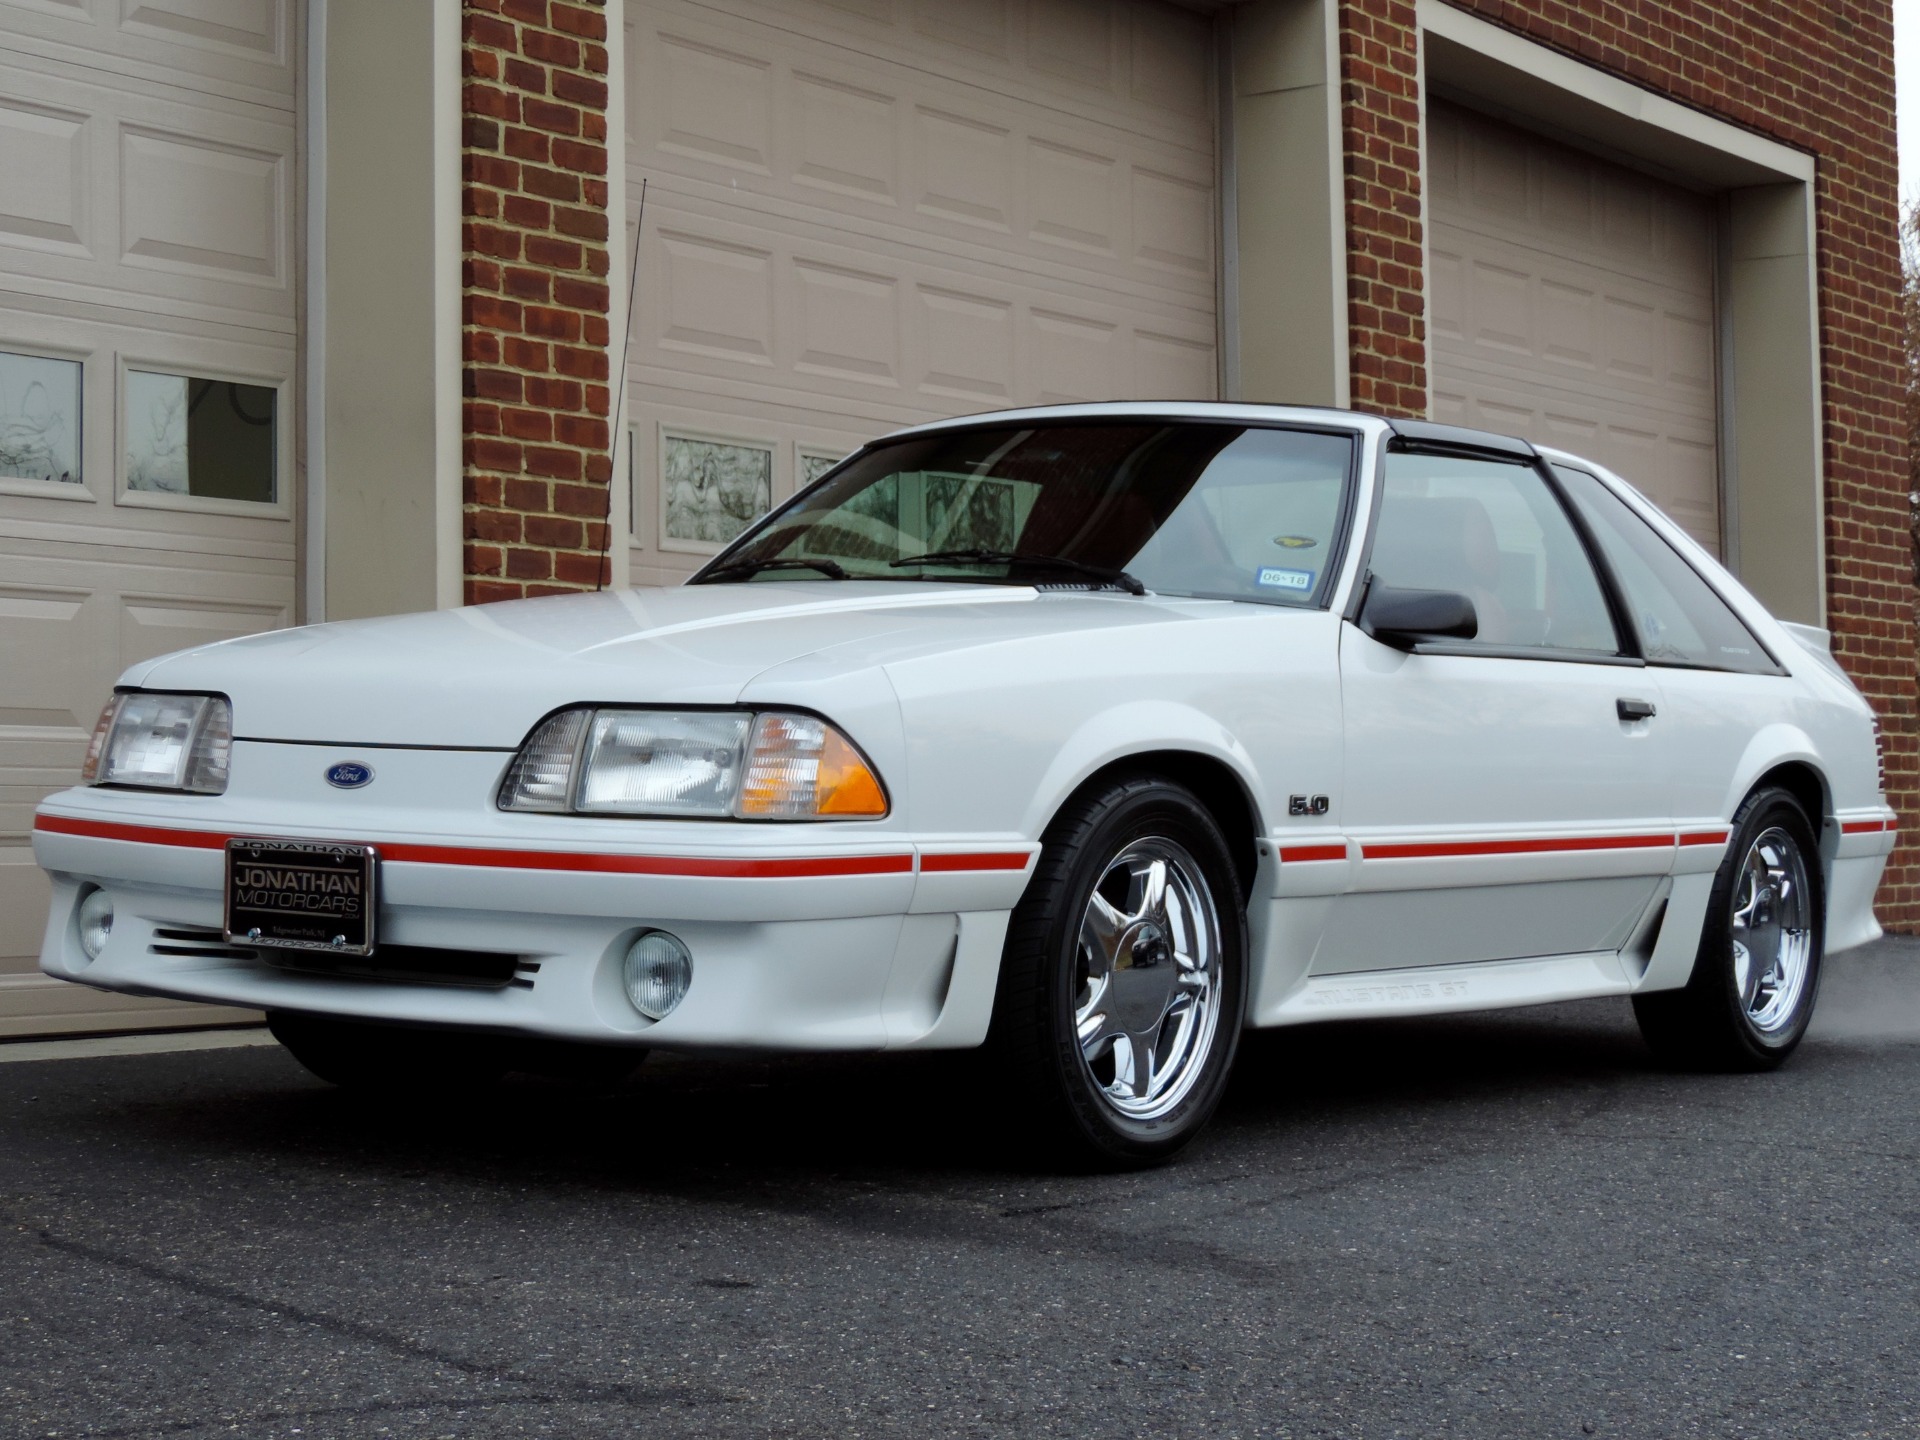 Mustang Of The Day: 1987 Ford Mustang GT 5.0